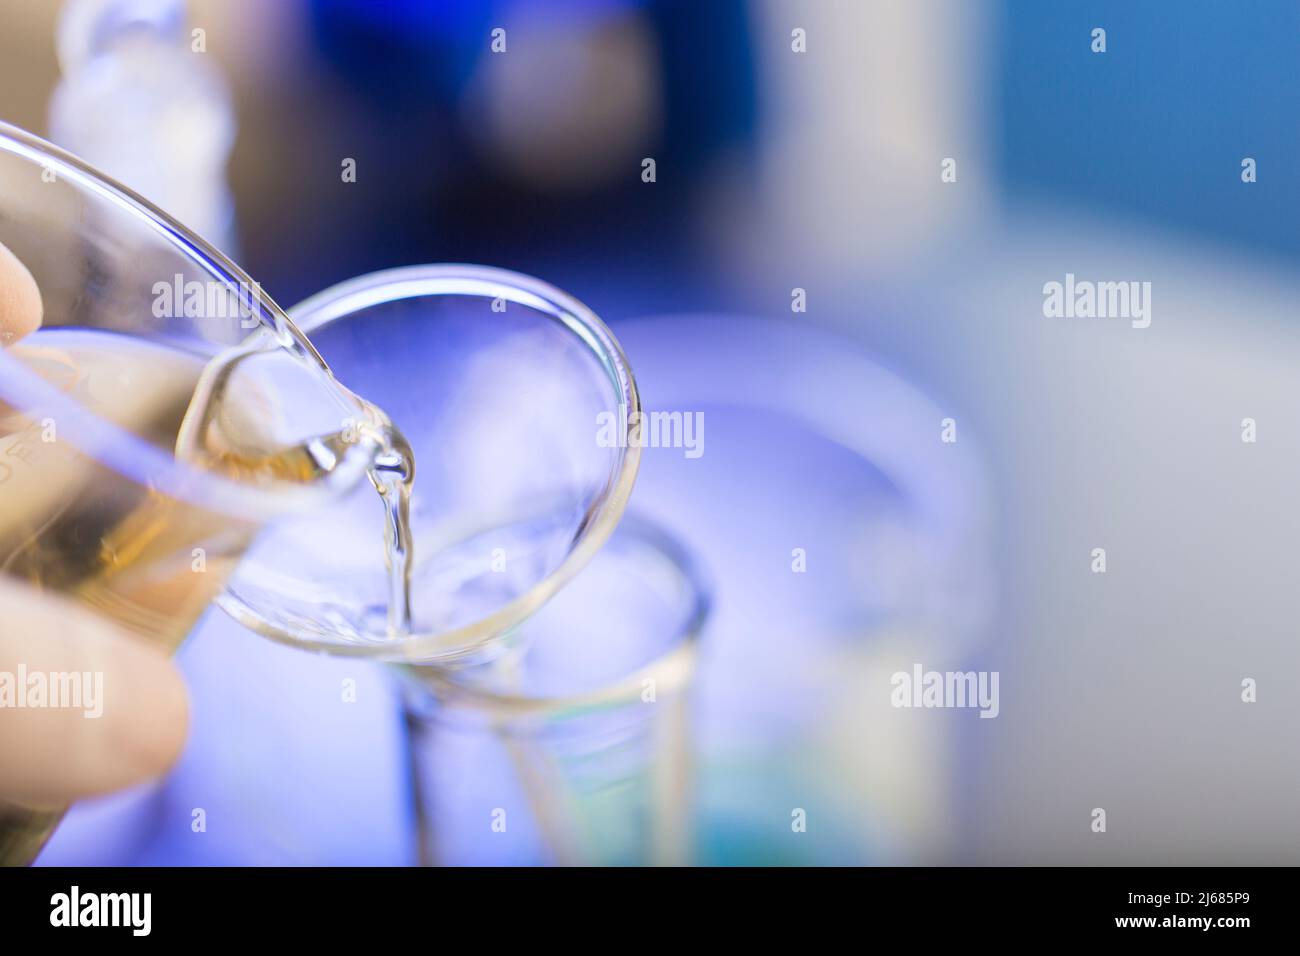 Dumping reagents into test tubes, chemistry LABS - stock photo Stock Photo